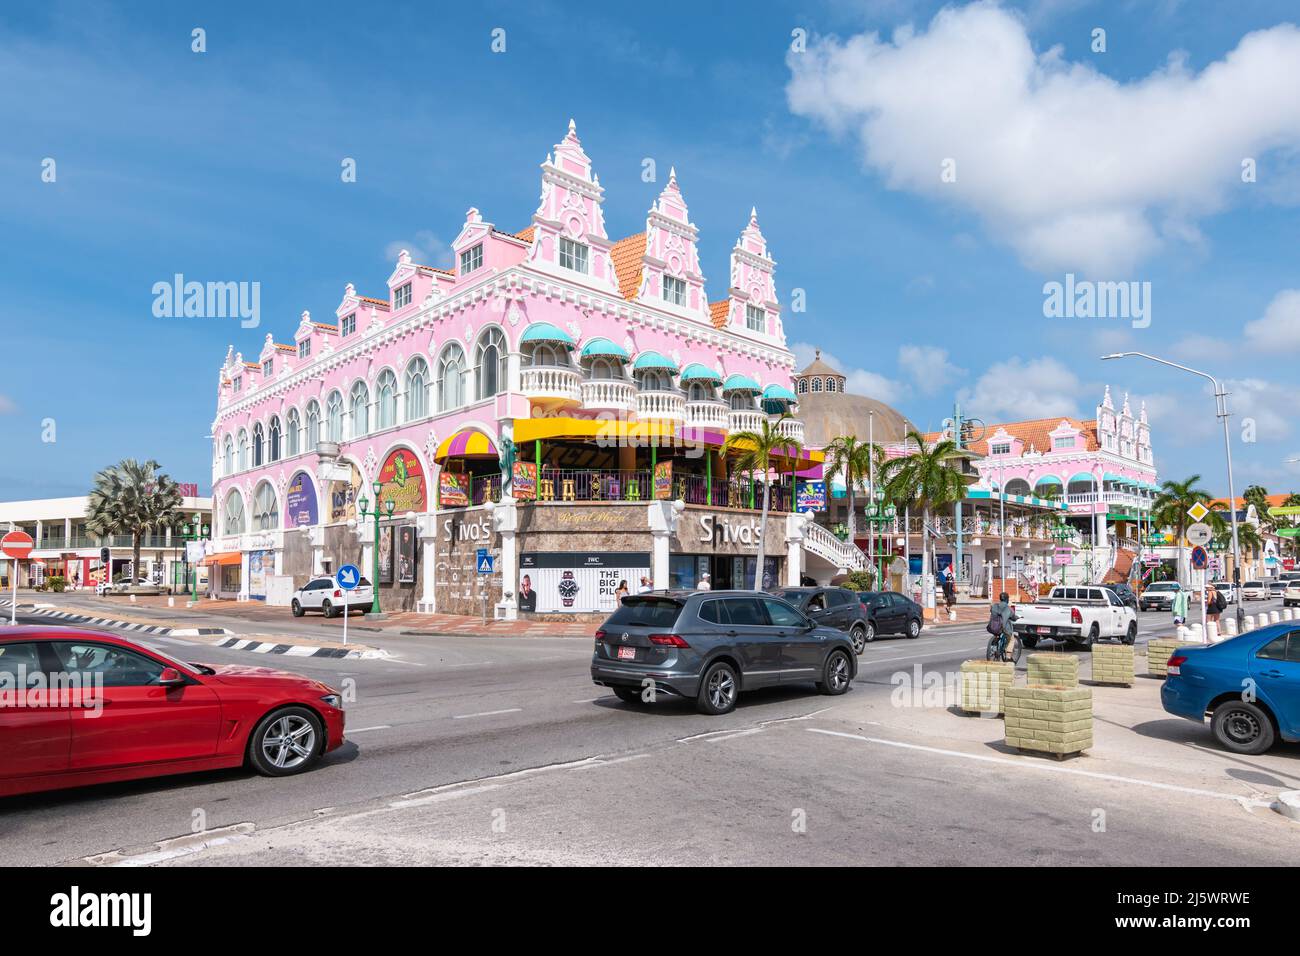 30+ View On Shopping Mall In Oranjestad Stock Photos, Pictures